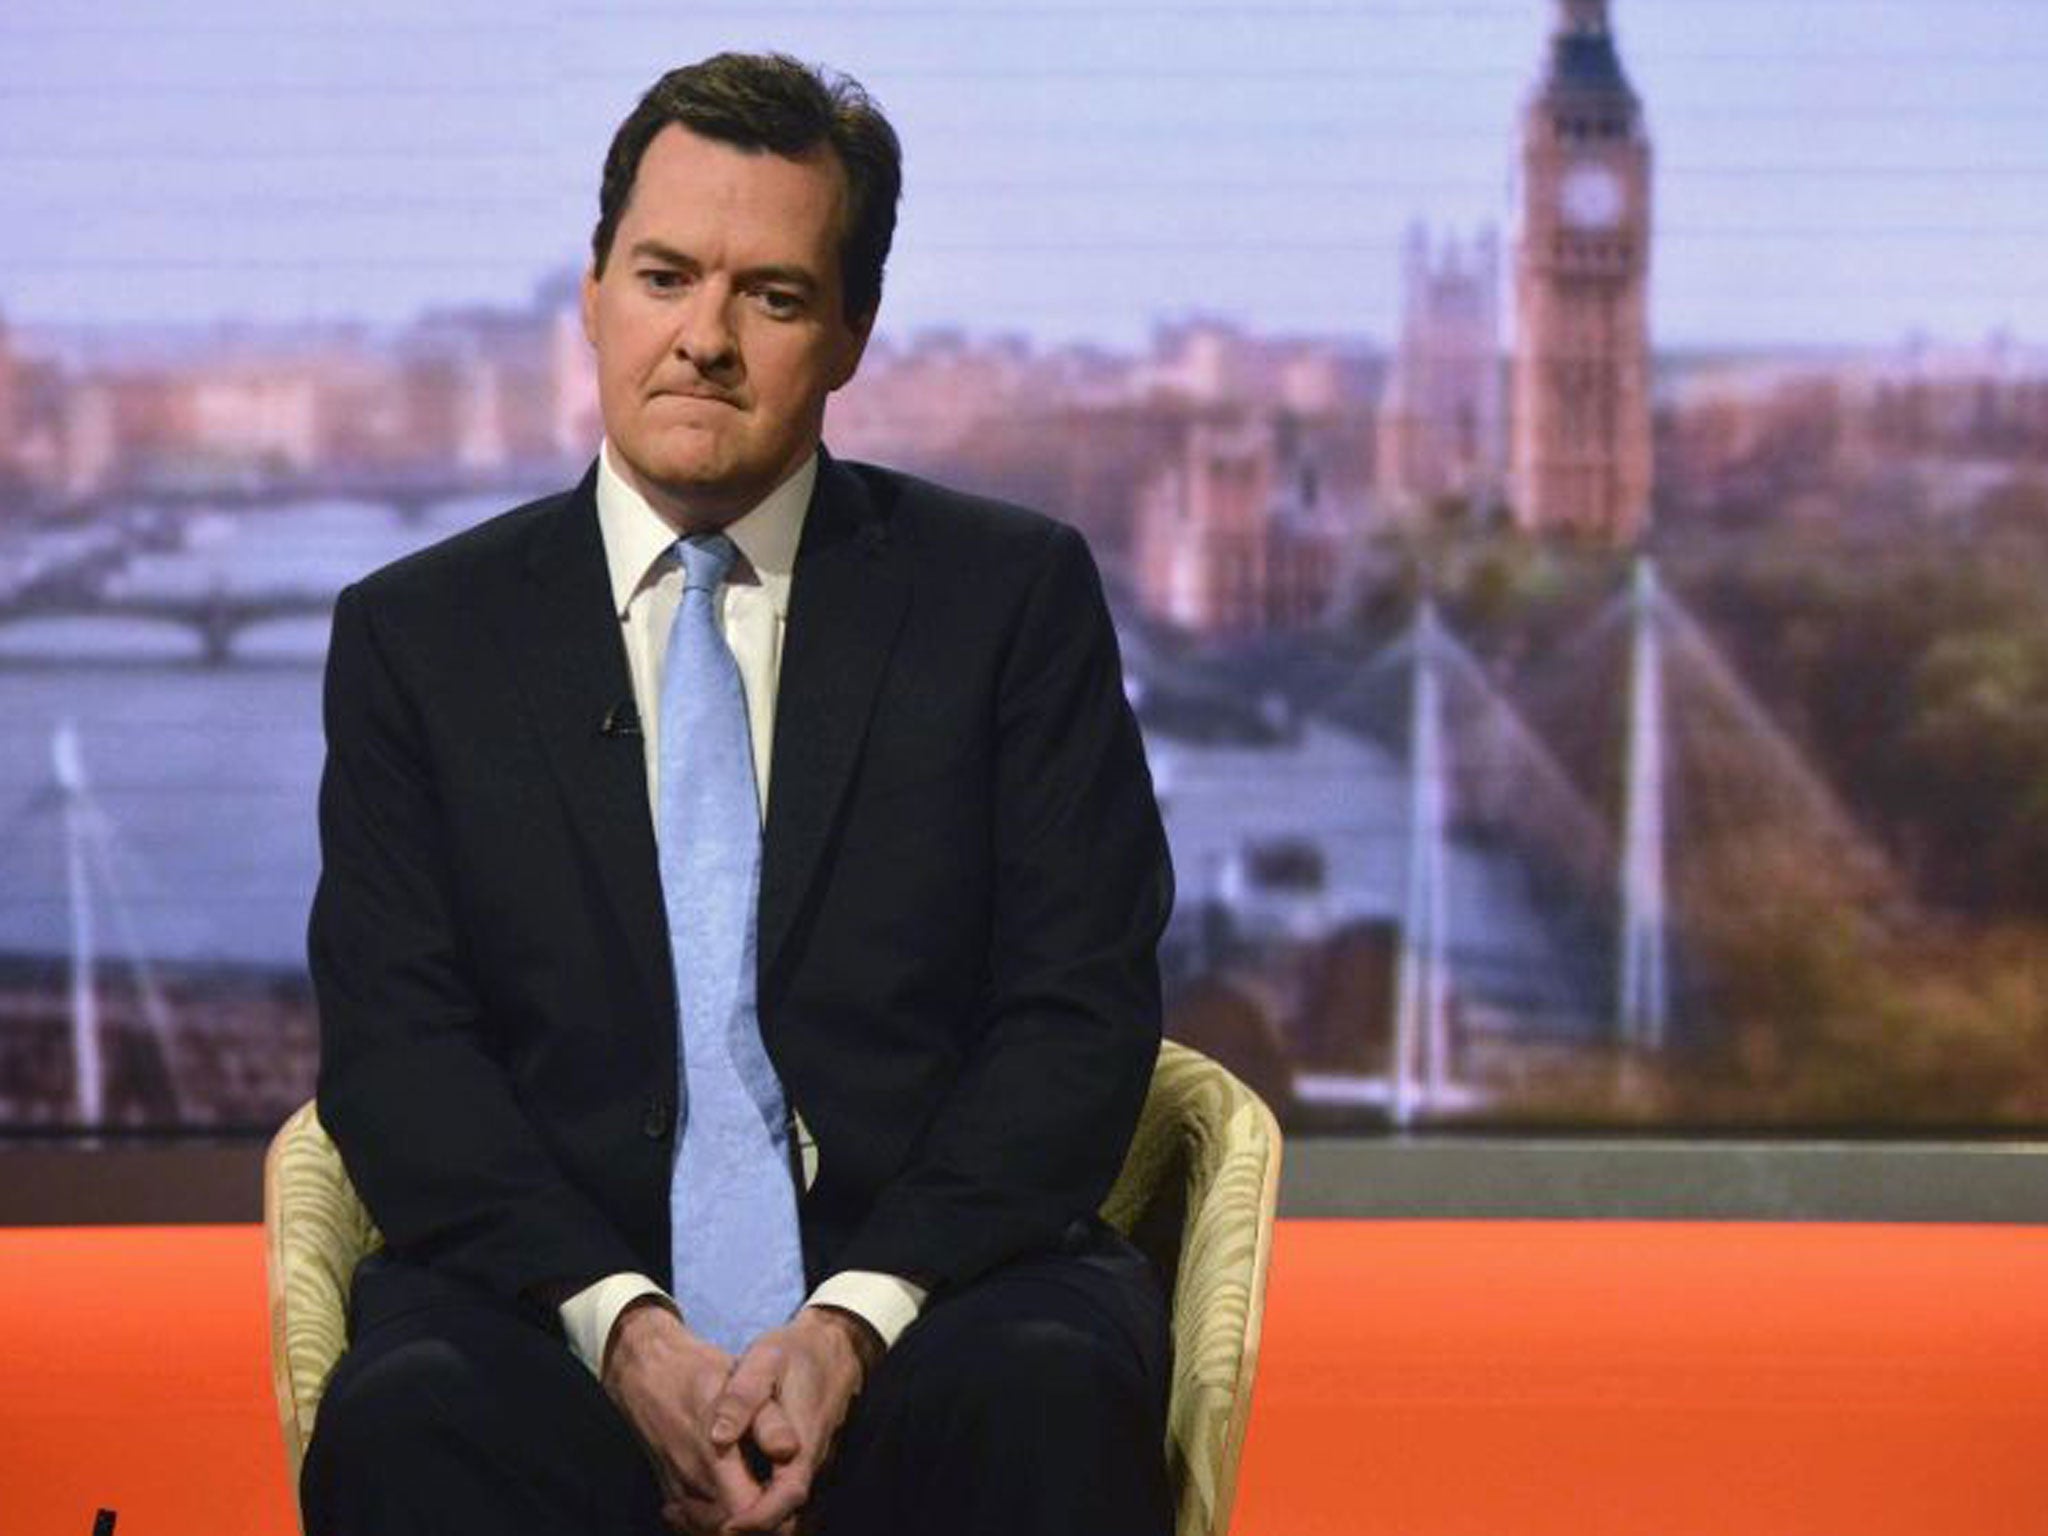 Better-off pensioners face losing benefits such as winter fuel allowances and free television licences after George Osborne said the country needed to look at whether they could still be afforded